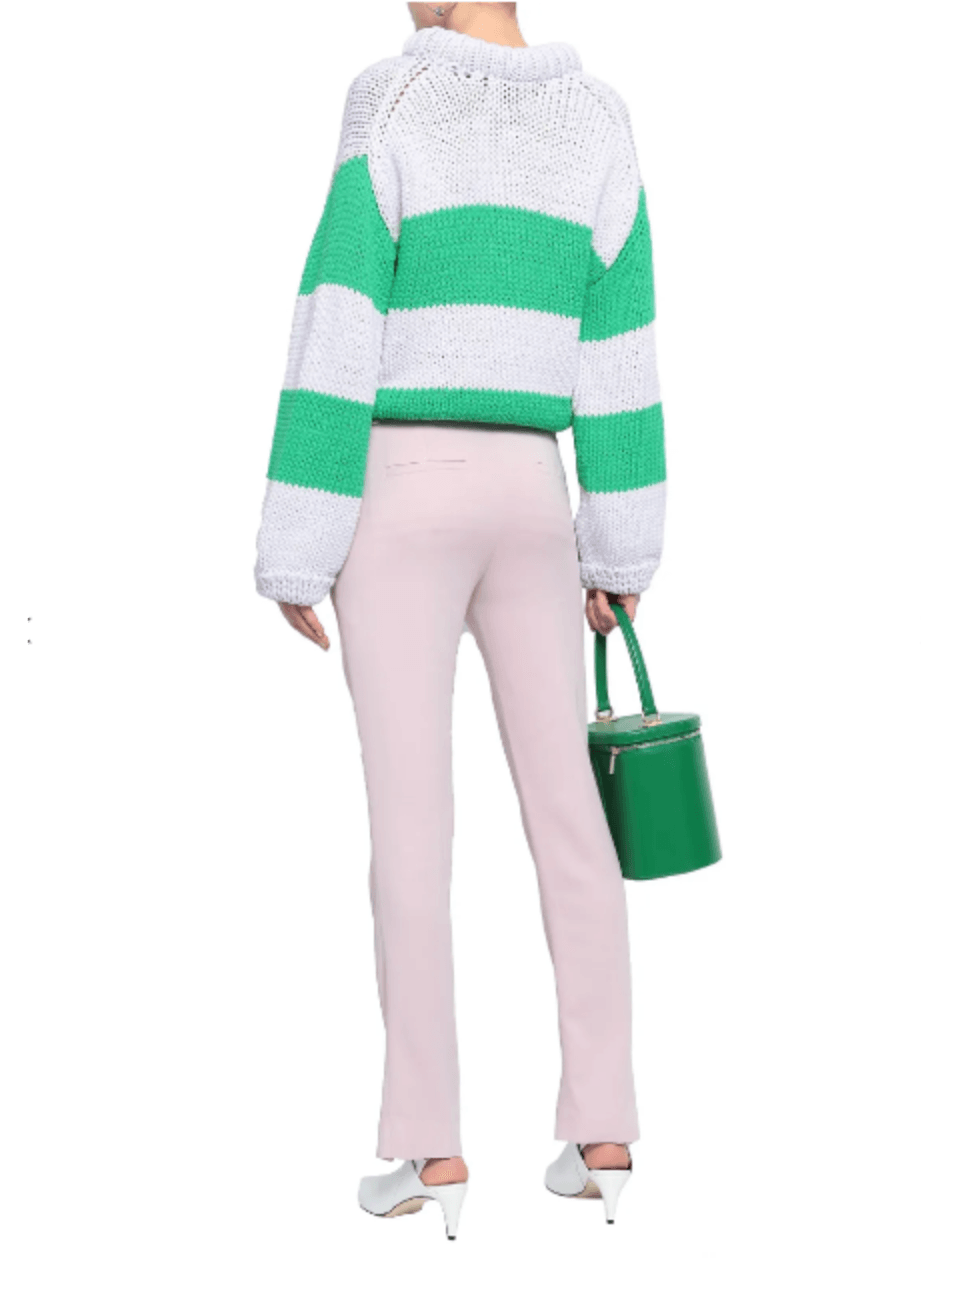 WHITE AND GREEN STRIPED SWEATER - codressing